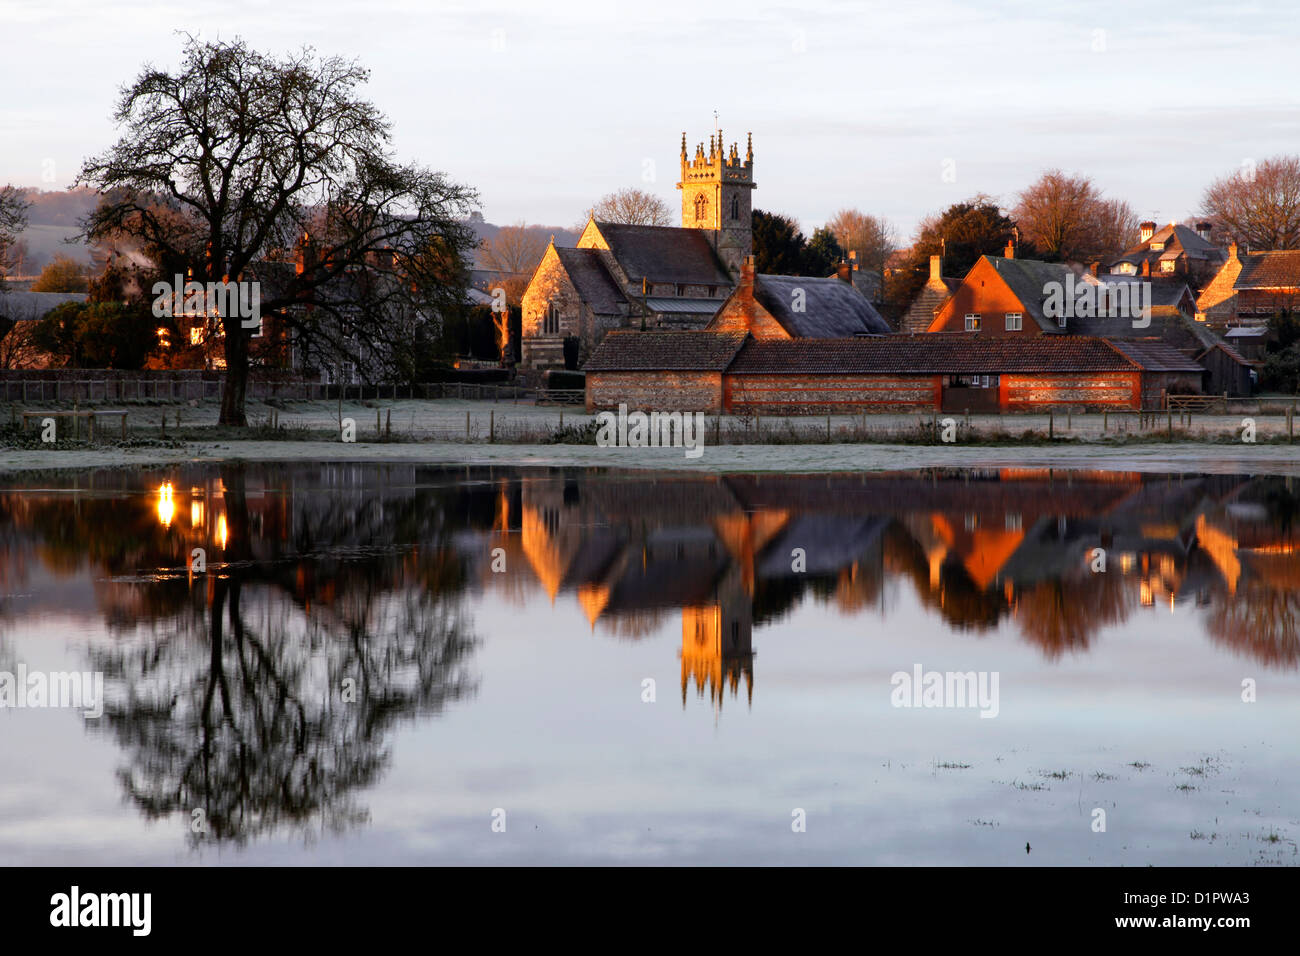 A flooded field beside the village of Great Wishford in Wiltshire, England. Stock Photo